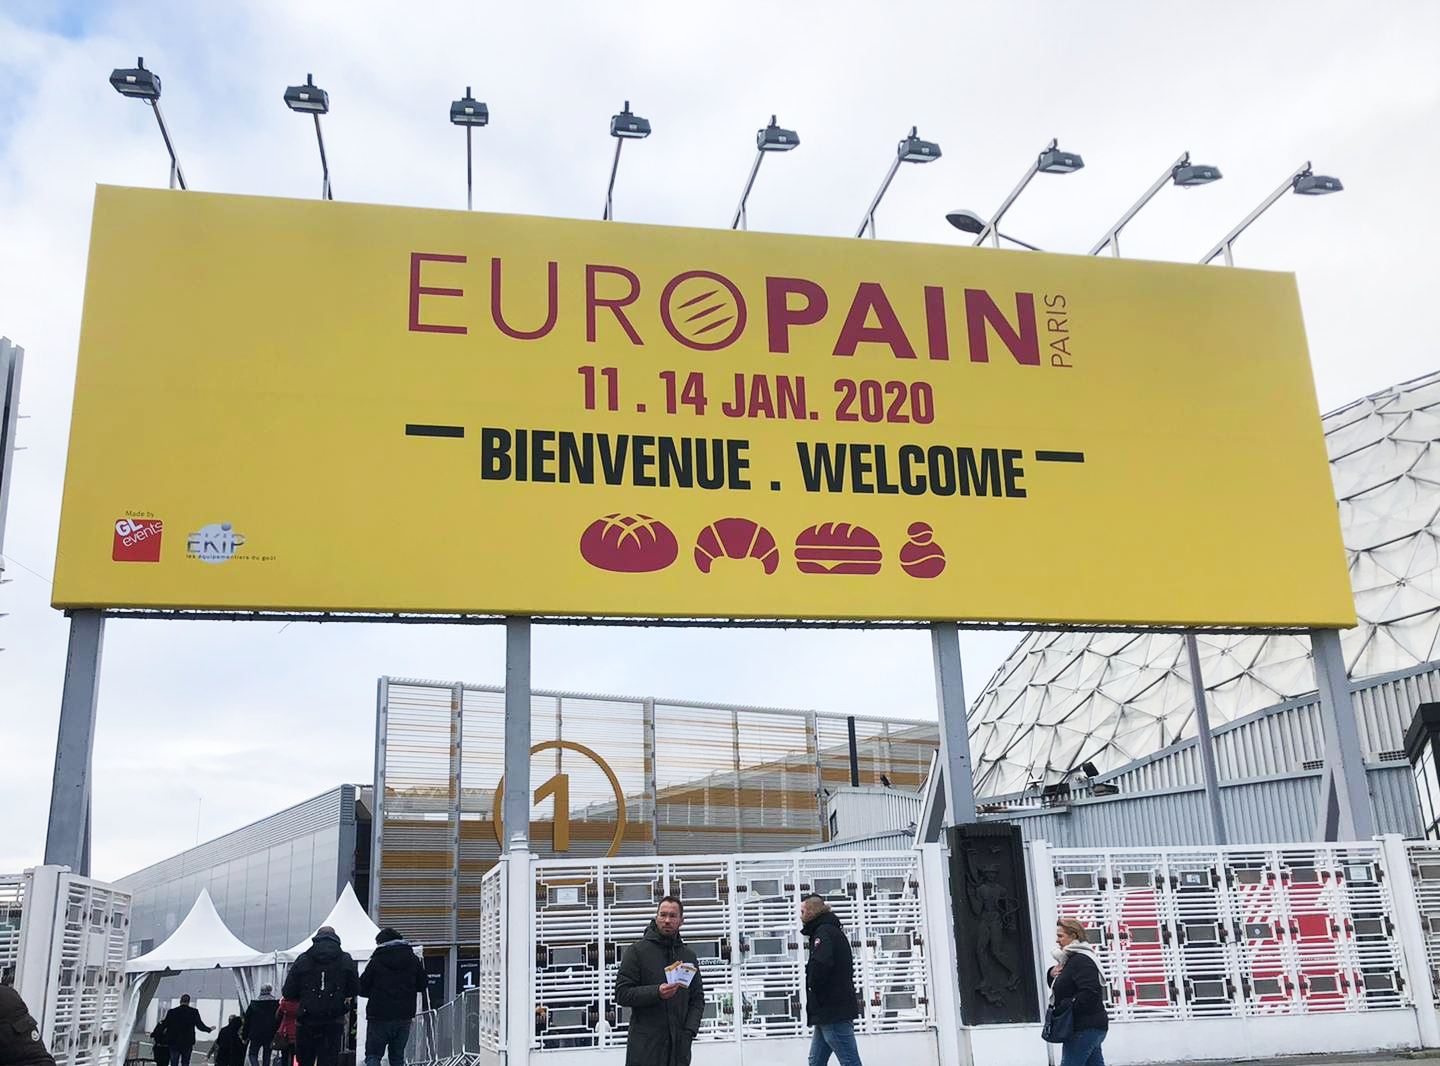 Bakery trends at Europain 2020